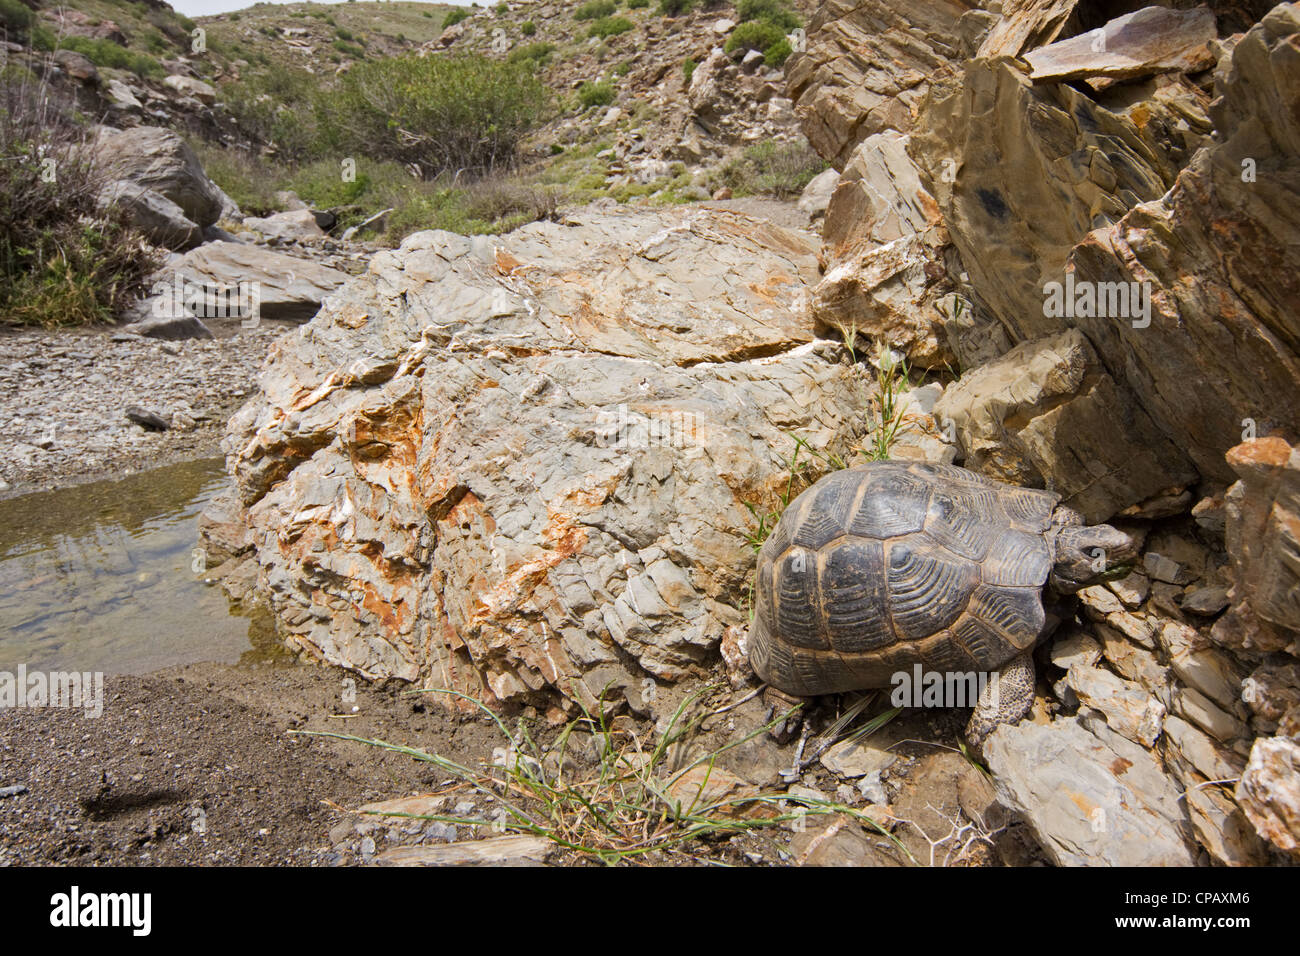 Hermann's tortoise (Testudo hermanni) in a rocky environment in Greece Stock Photo